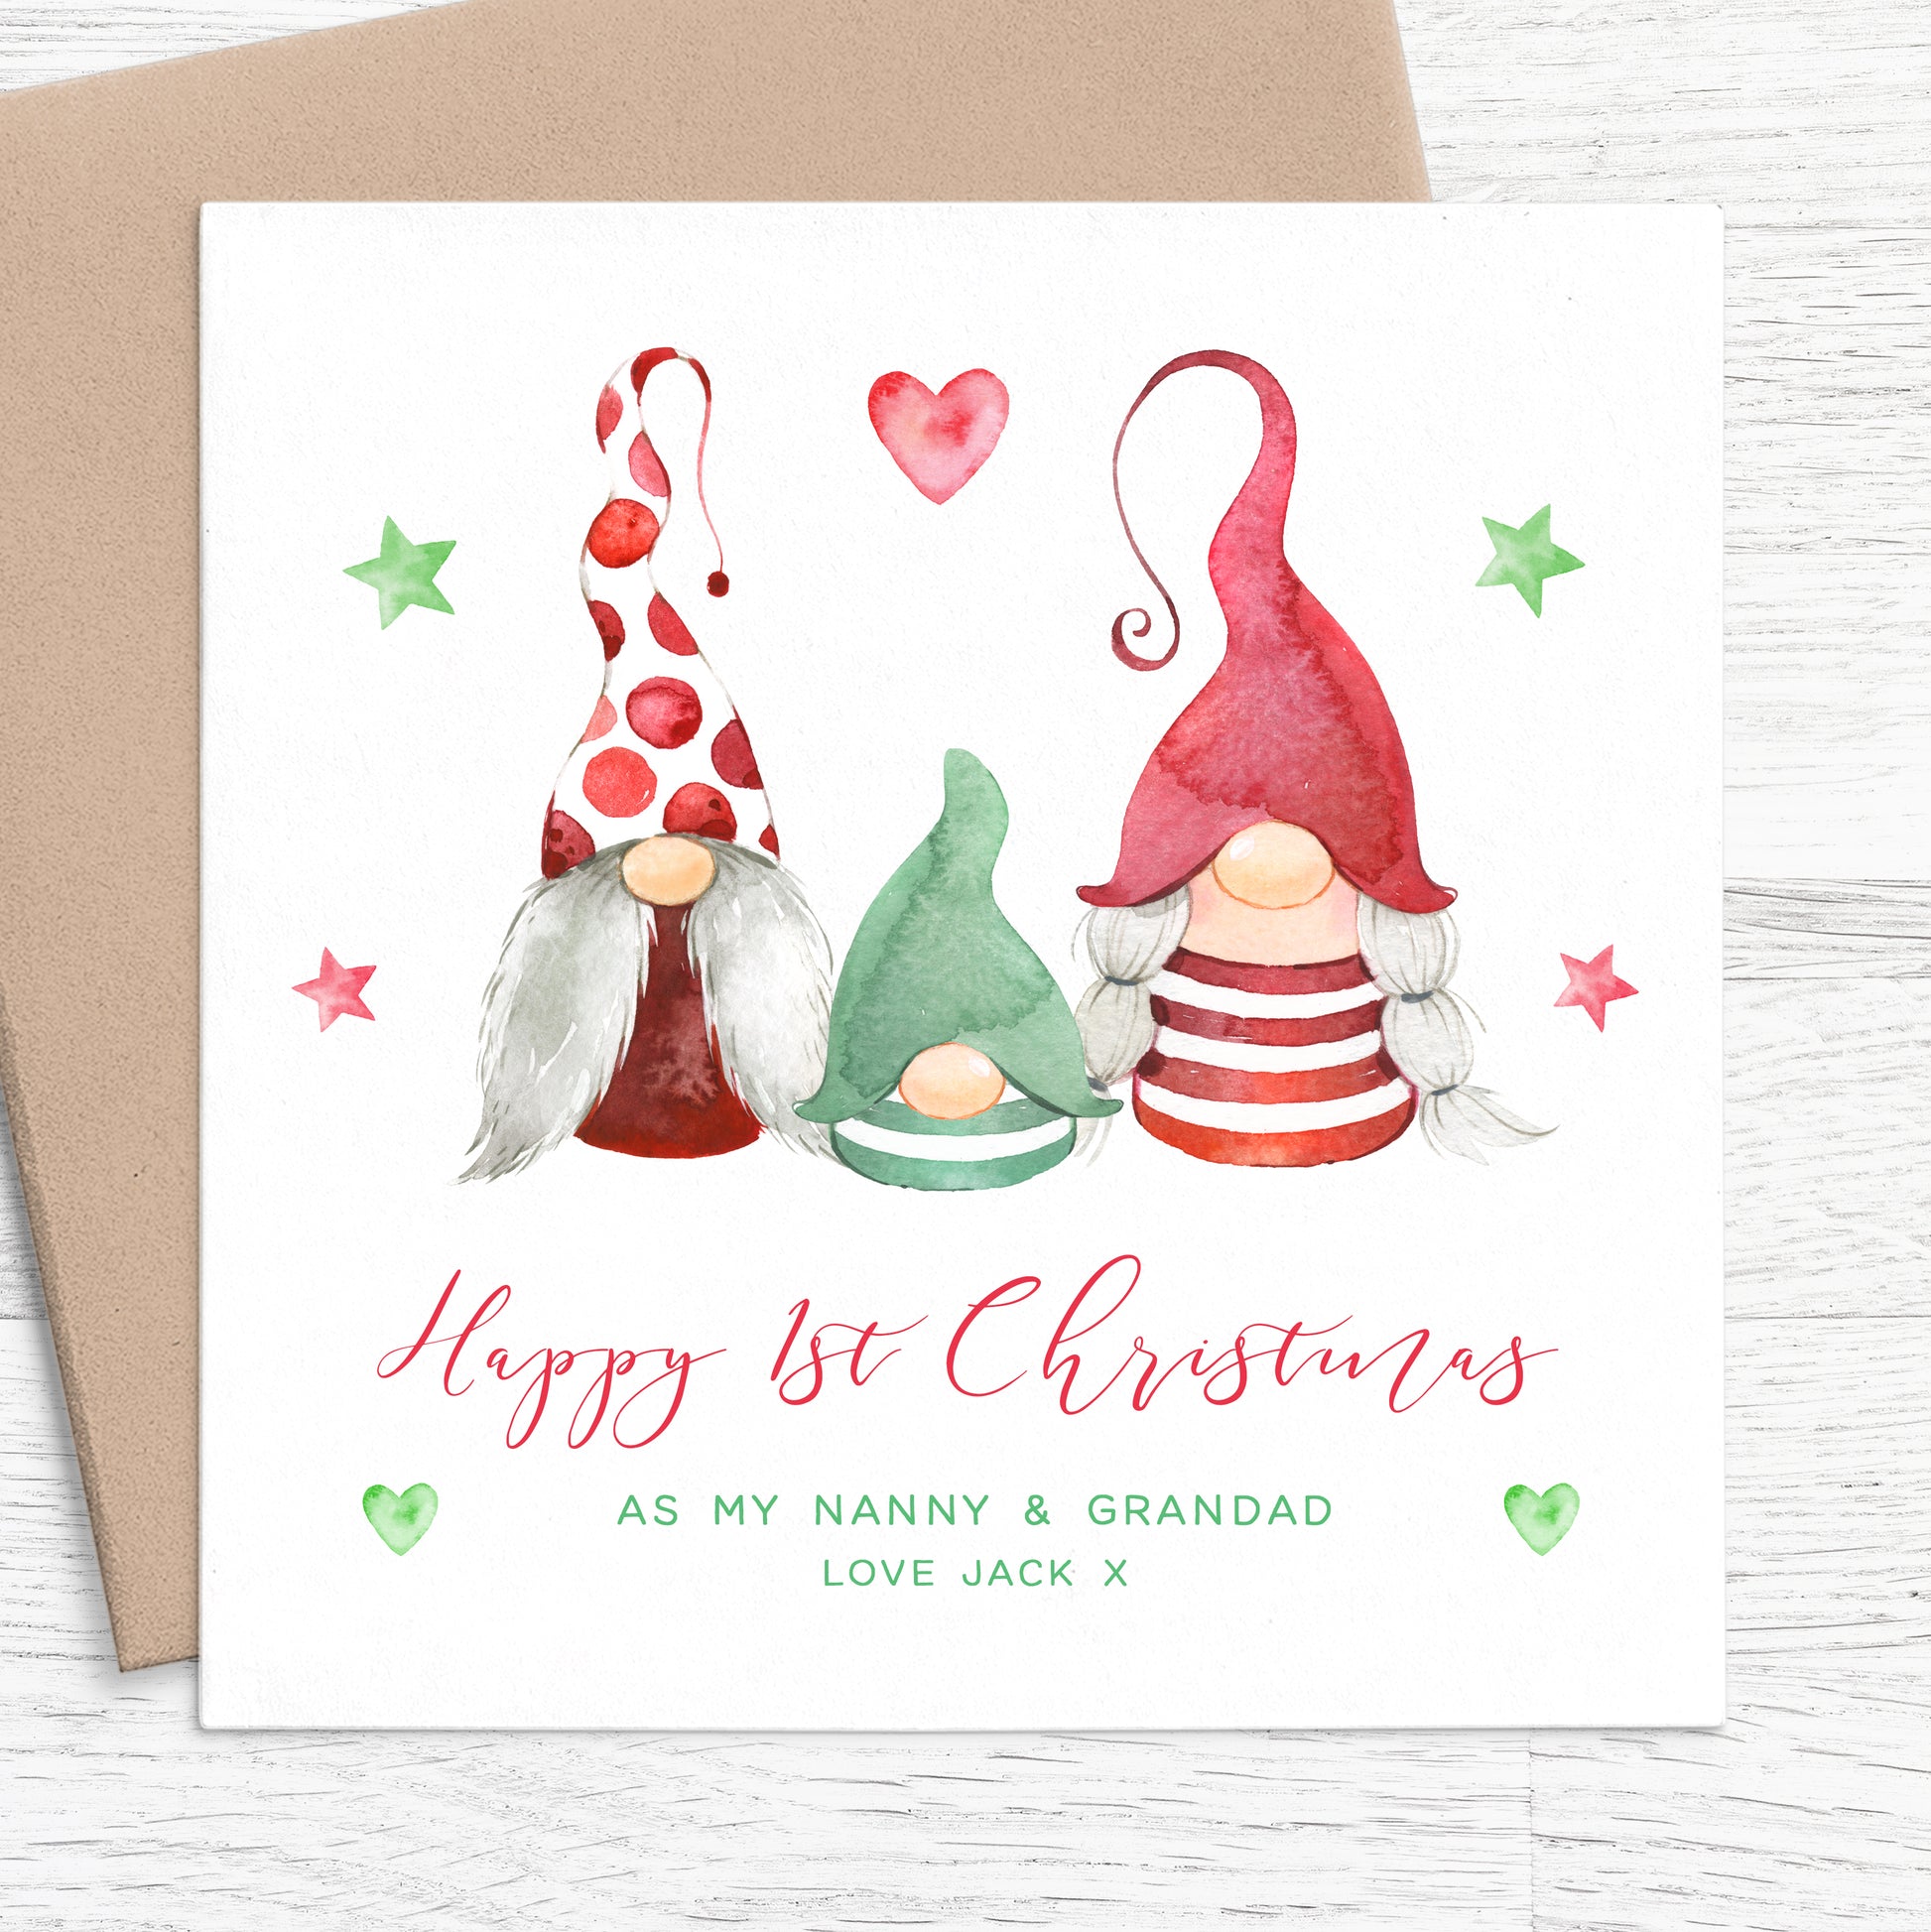 happy first christmas as my nanny and grandad card personalised gnomes gonks kraft envelope matte white cardstock